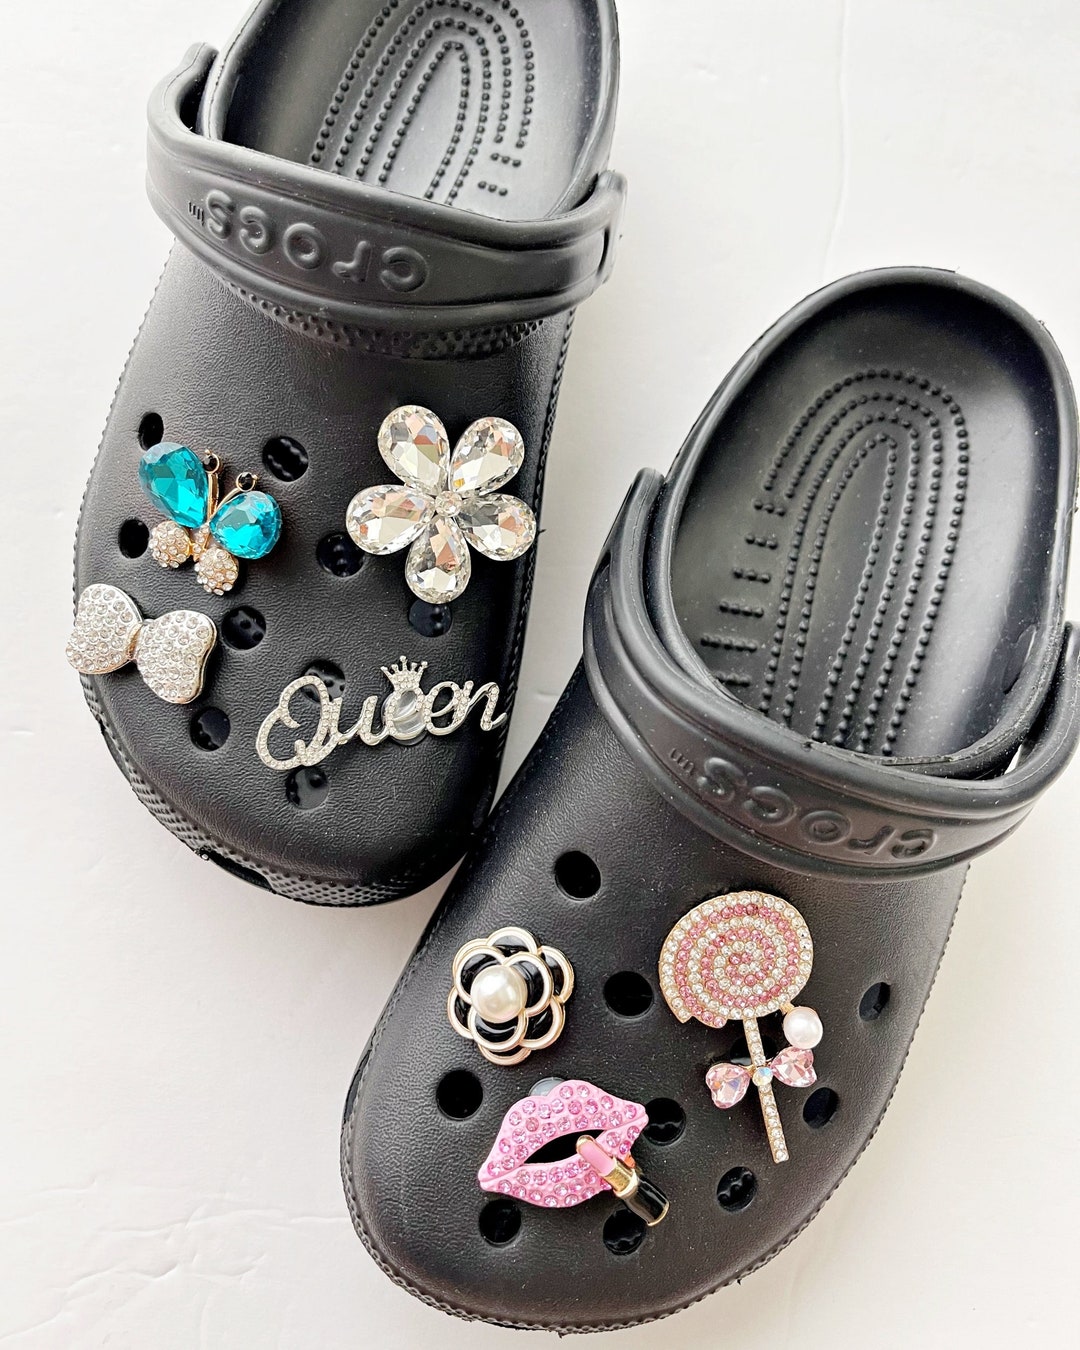 6pc LUXURY INSPIRED SHOE CHARMS ** INCLUDES FREE 4PC SET BLING CHARMS – My  Royal Radiance